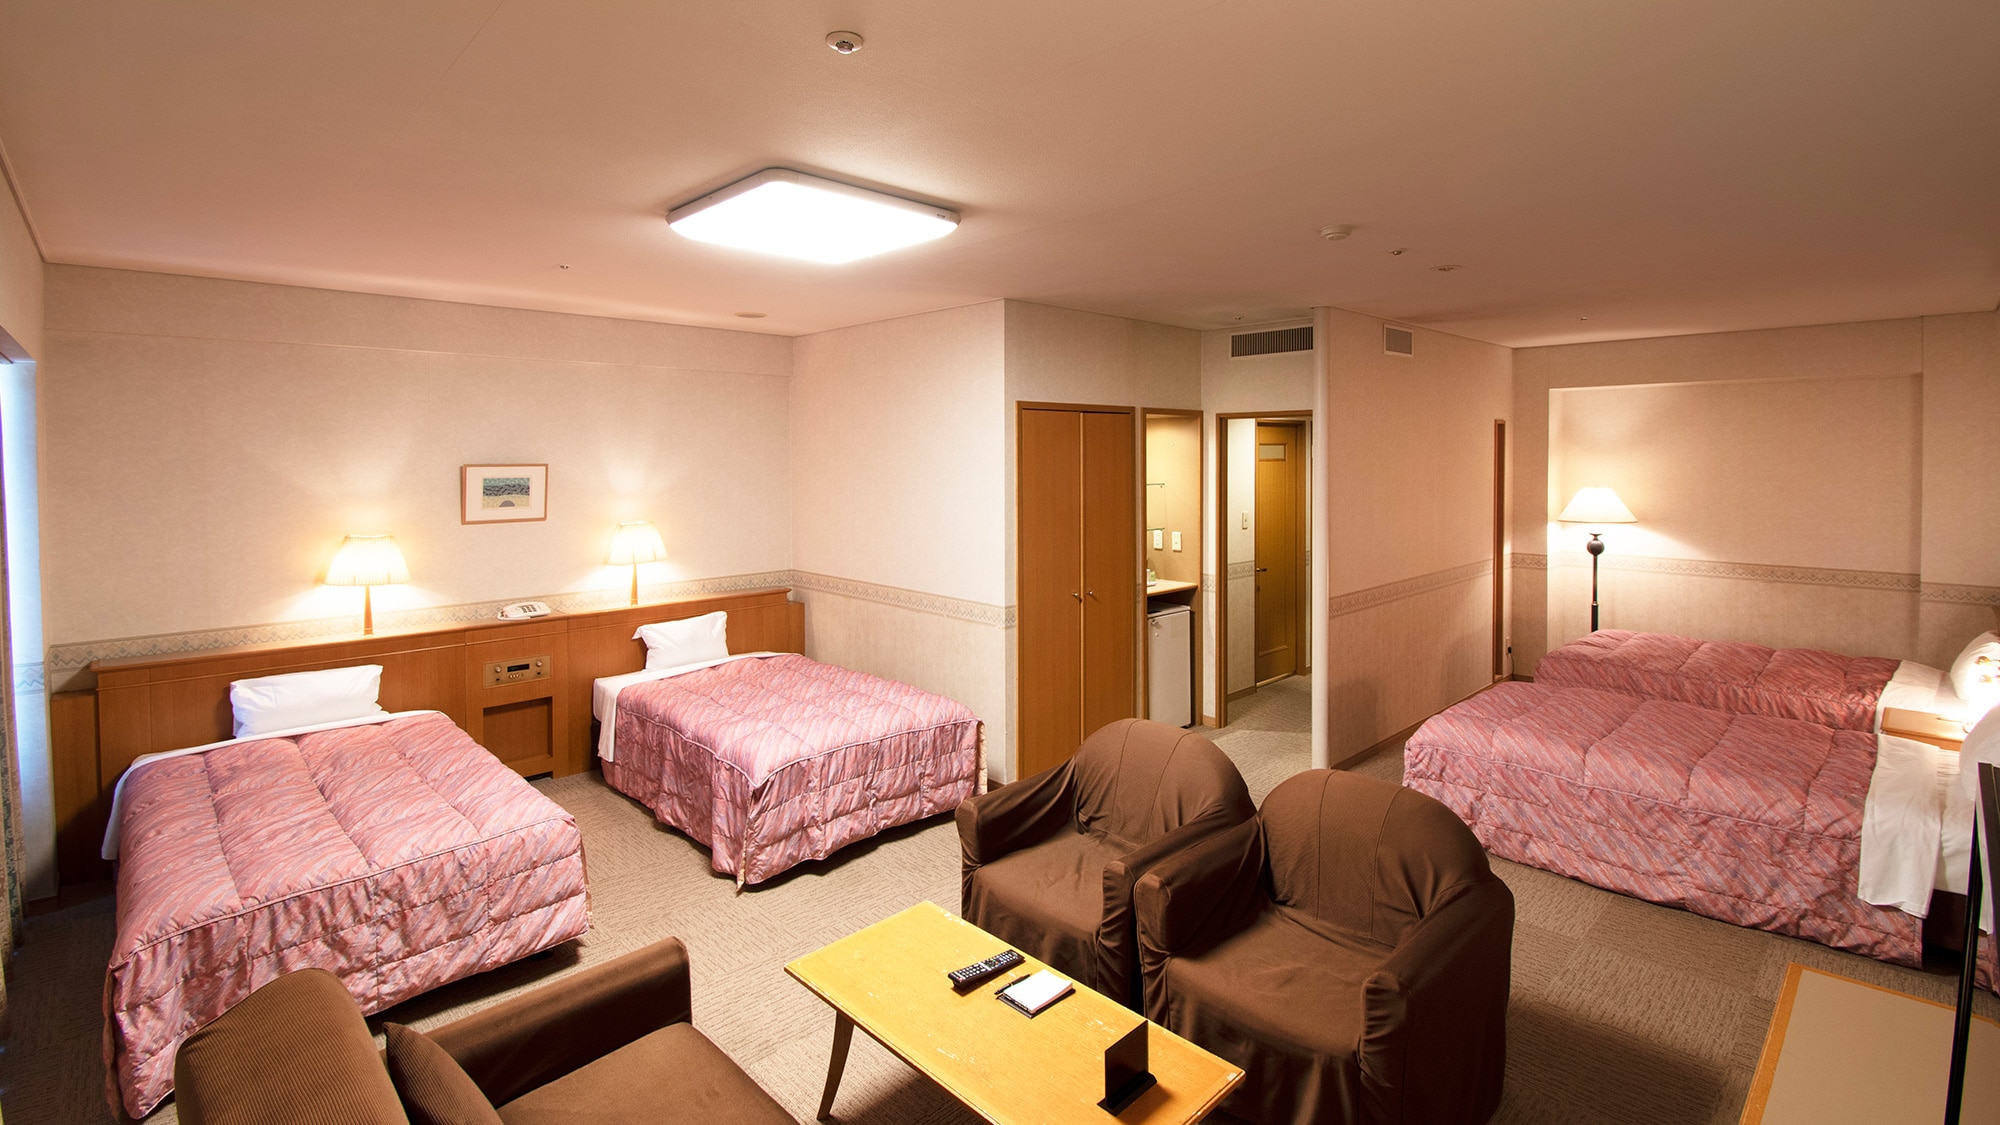 ◆ Deluxe Room [North Wing] 52.3 square meters